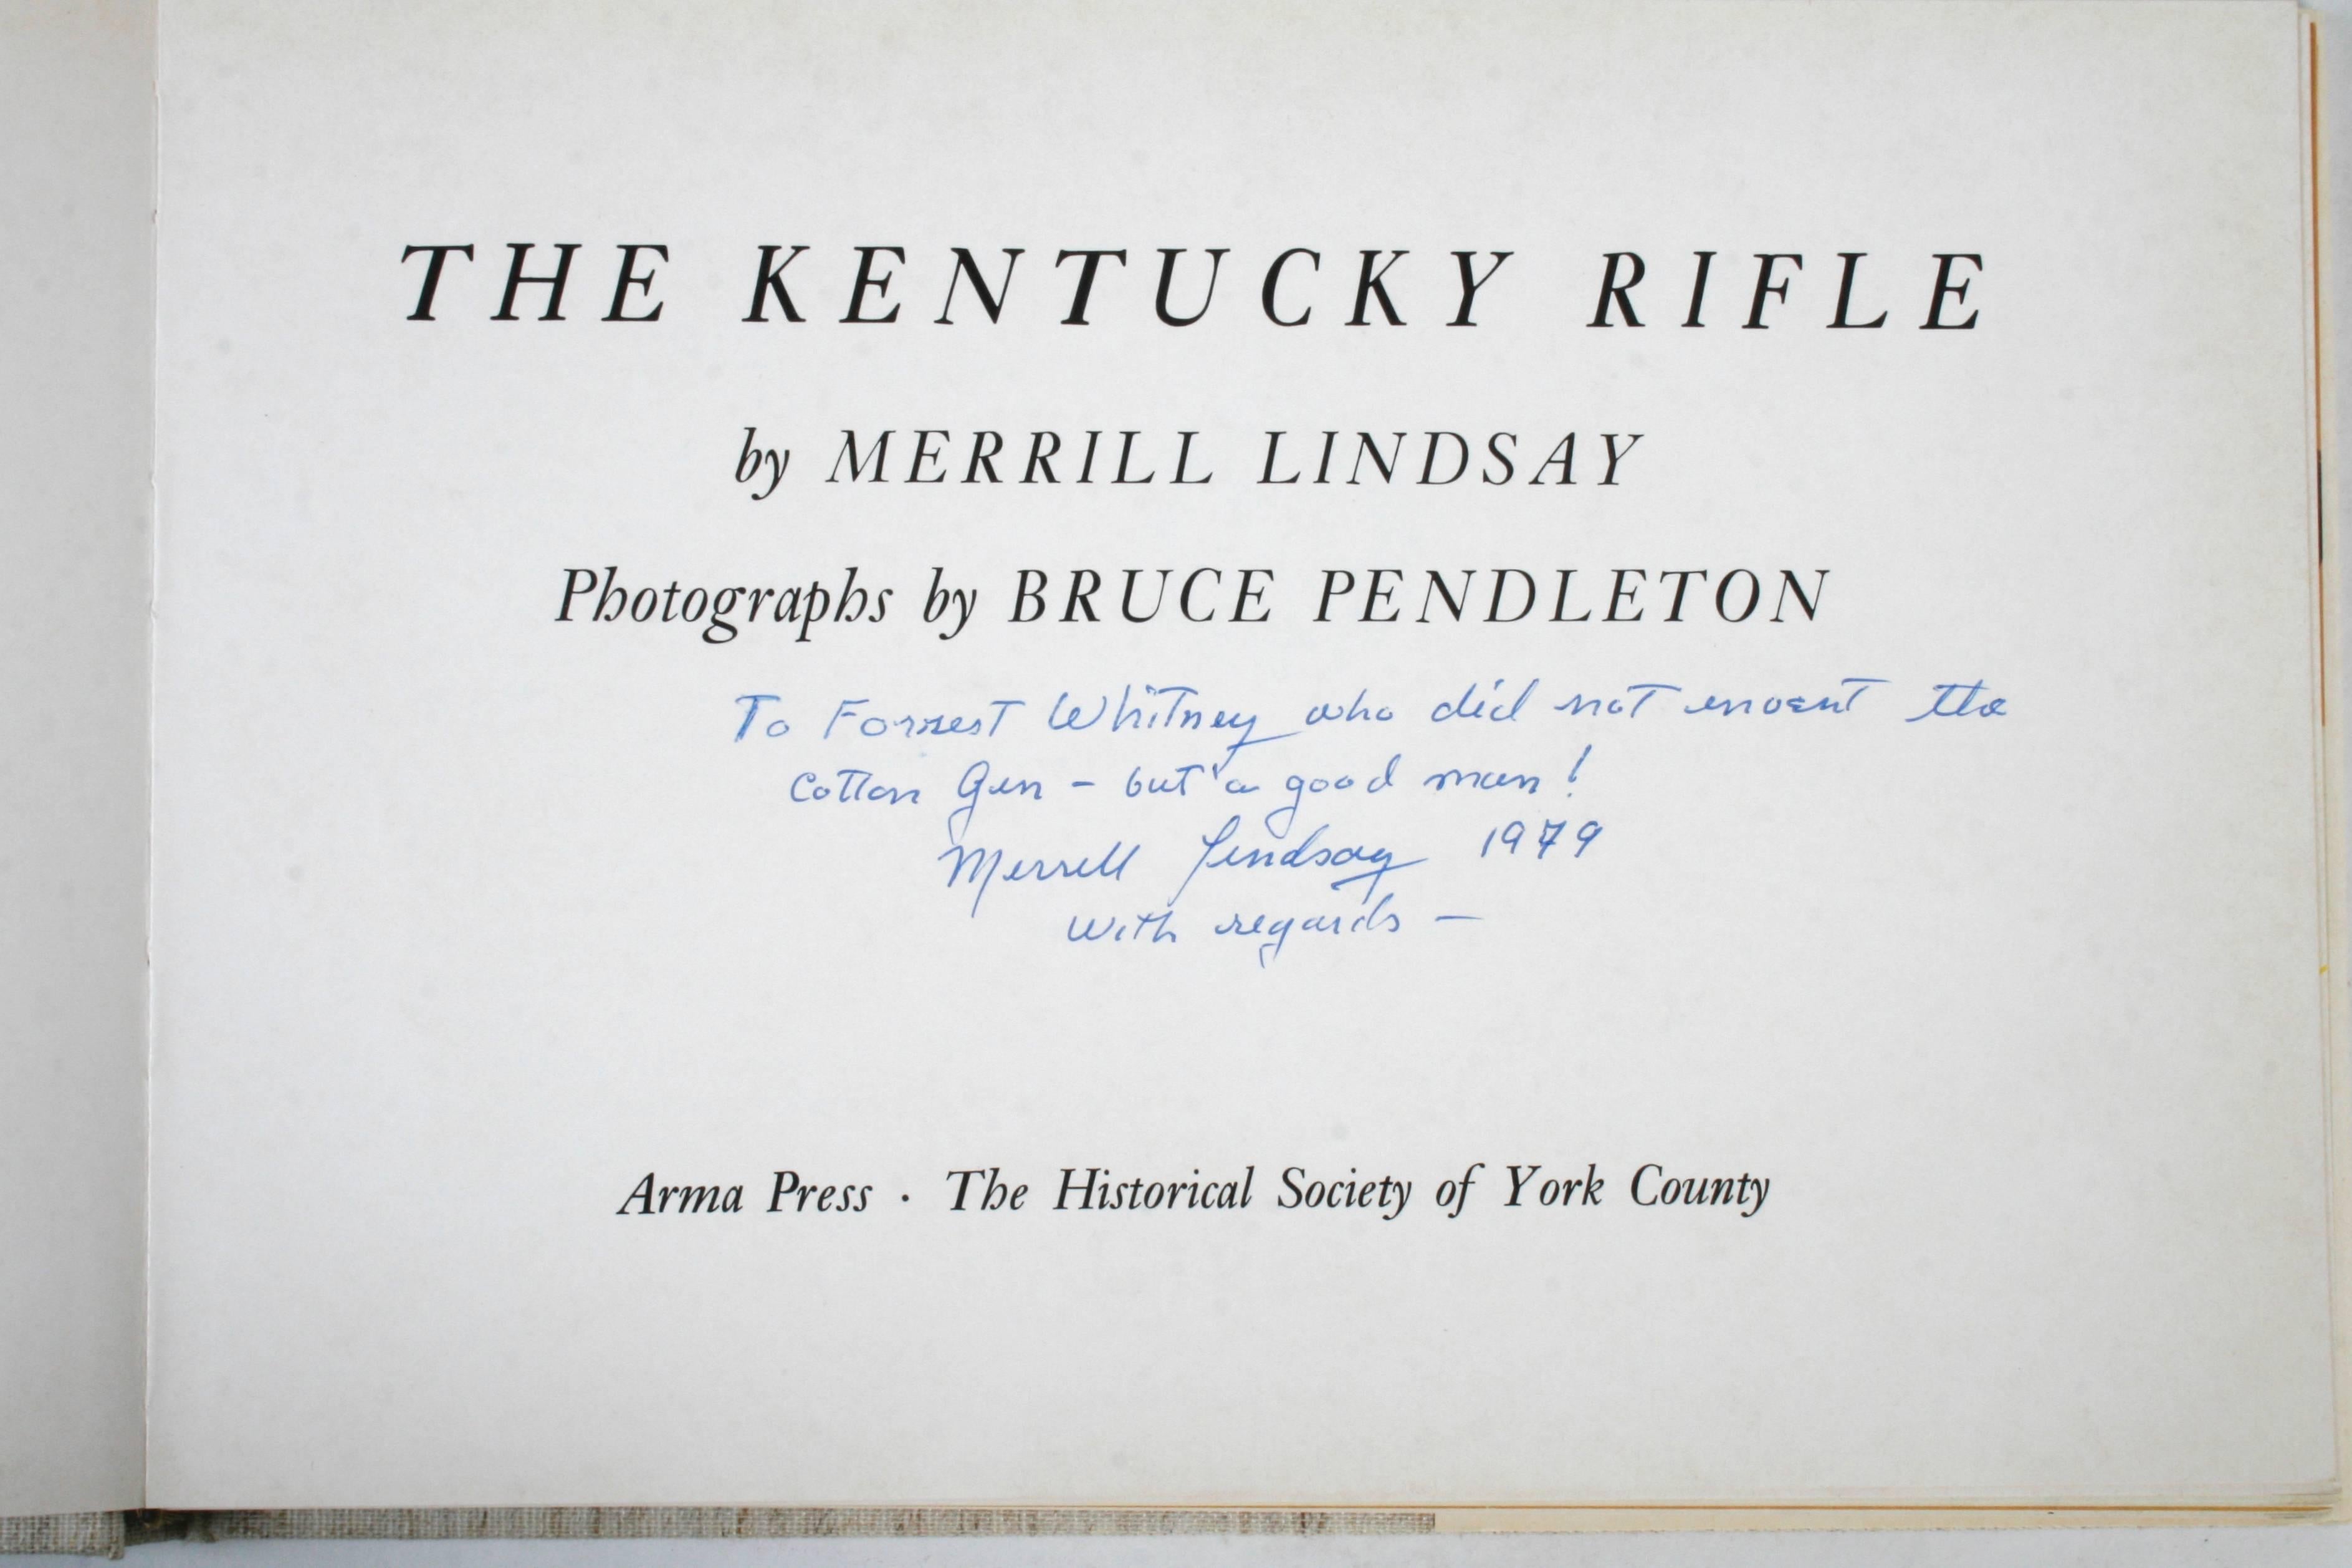 The Kentucky rifle, by Merrill Lindsay and photographed by Bruce Pendleton. Armar Press, Historical Society of York County, 1972. 1st edition 2nd printing hardcover with dust jacket. Rare copy signed by the Author. This book examines the development